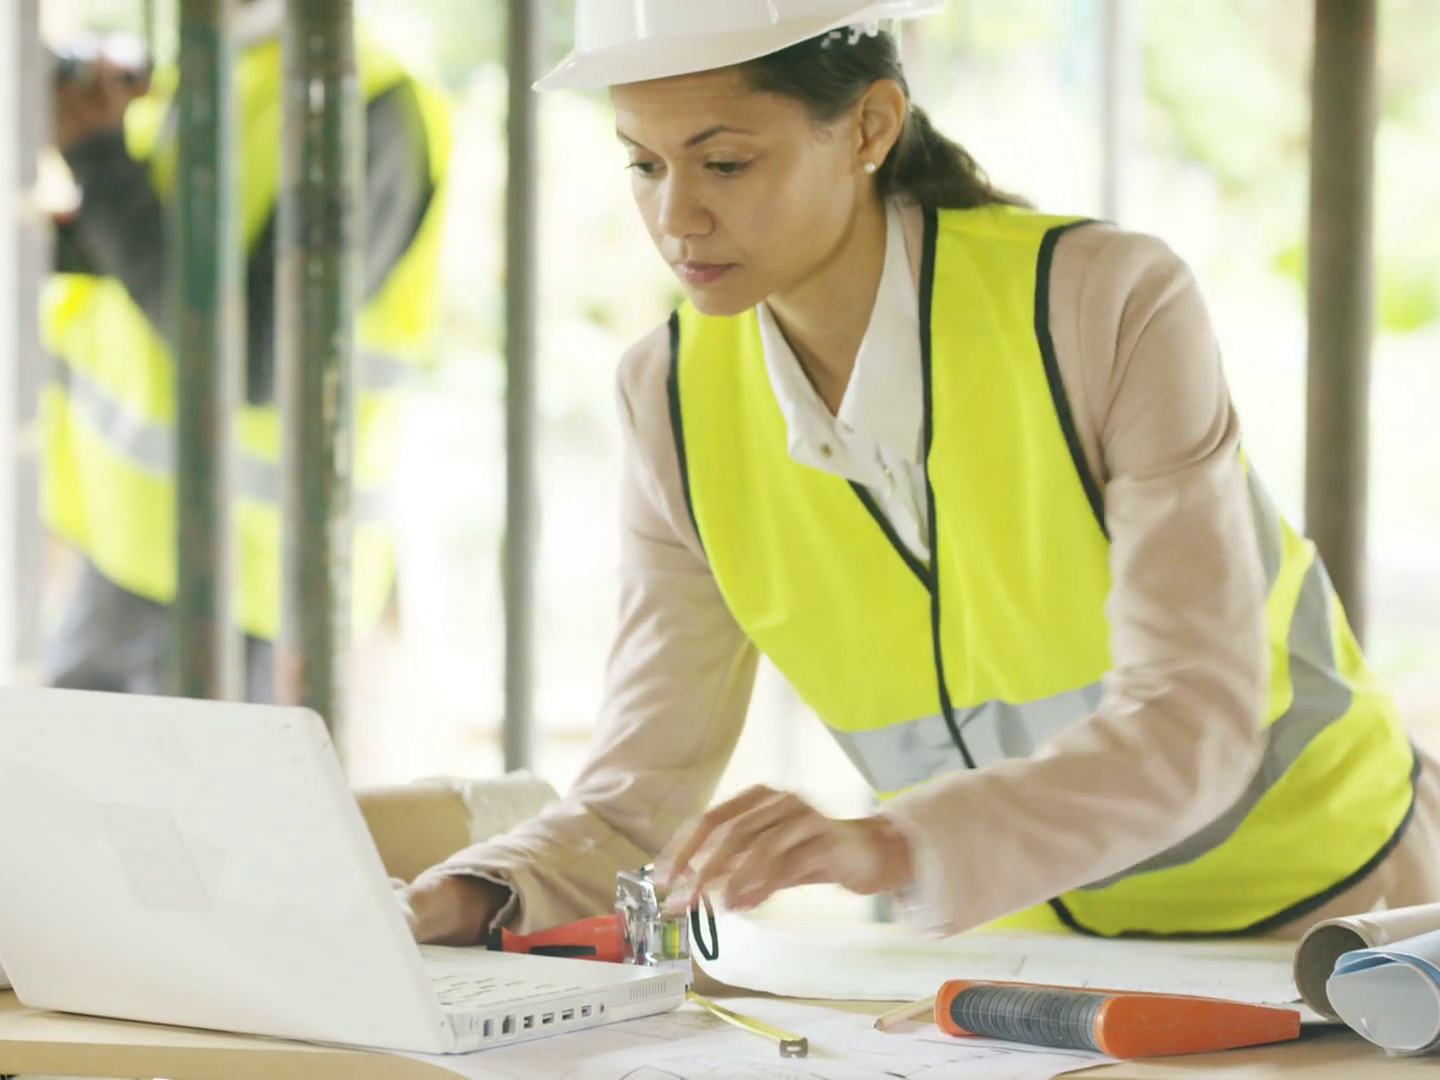 Women represent 31 percent of the total architecture population in Australia; however, their presence is not so widespread among the senior levels, says gender equity advocacy group Parlour in a new report. Image: Video Blocks
